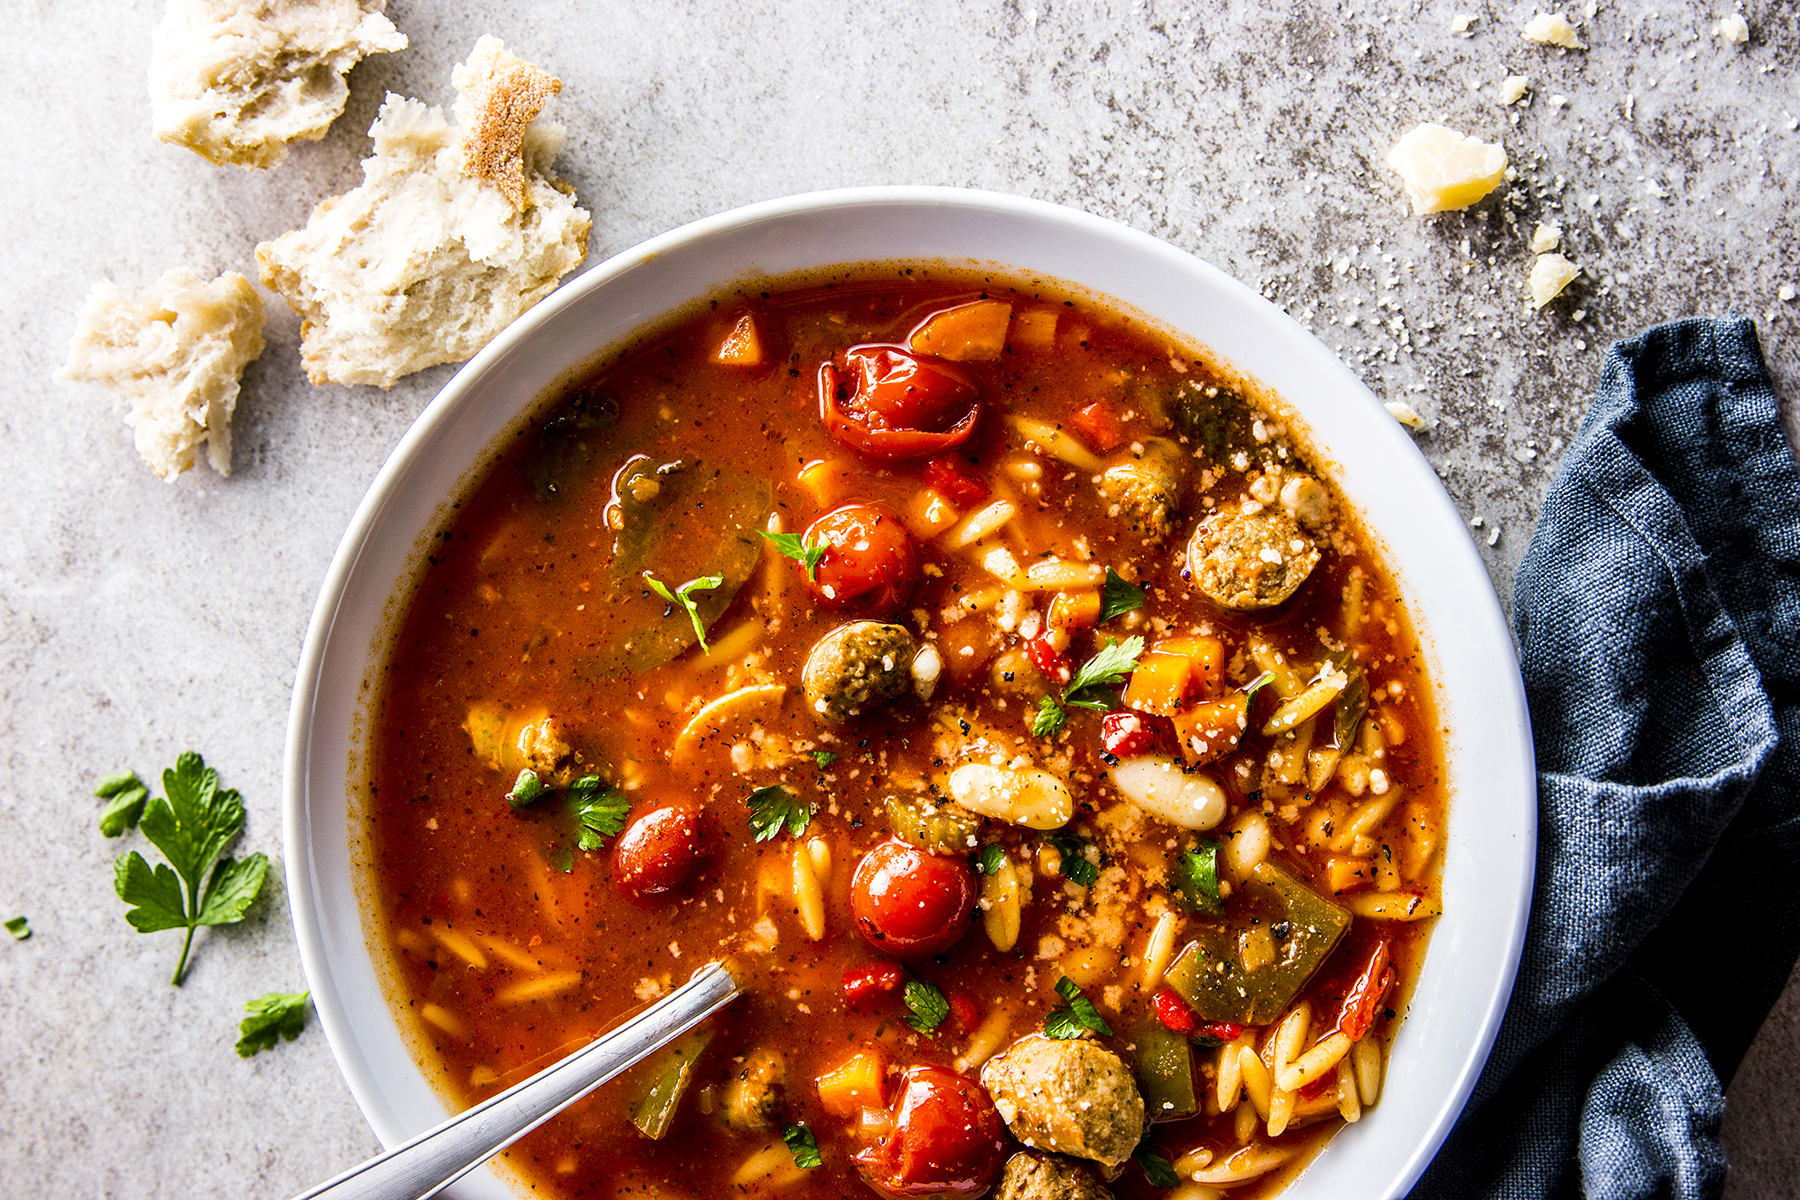 https://food-fanatic-res.cloudinary.com/iu/s--N0ScJfrm--/f_auto,q_auto/v1506684178/slow-cooker-tuscan-white-bean-soup-with-sausage-photo